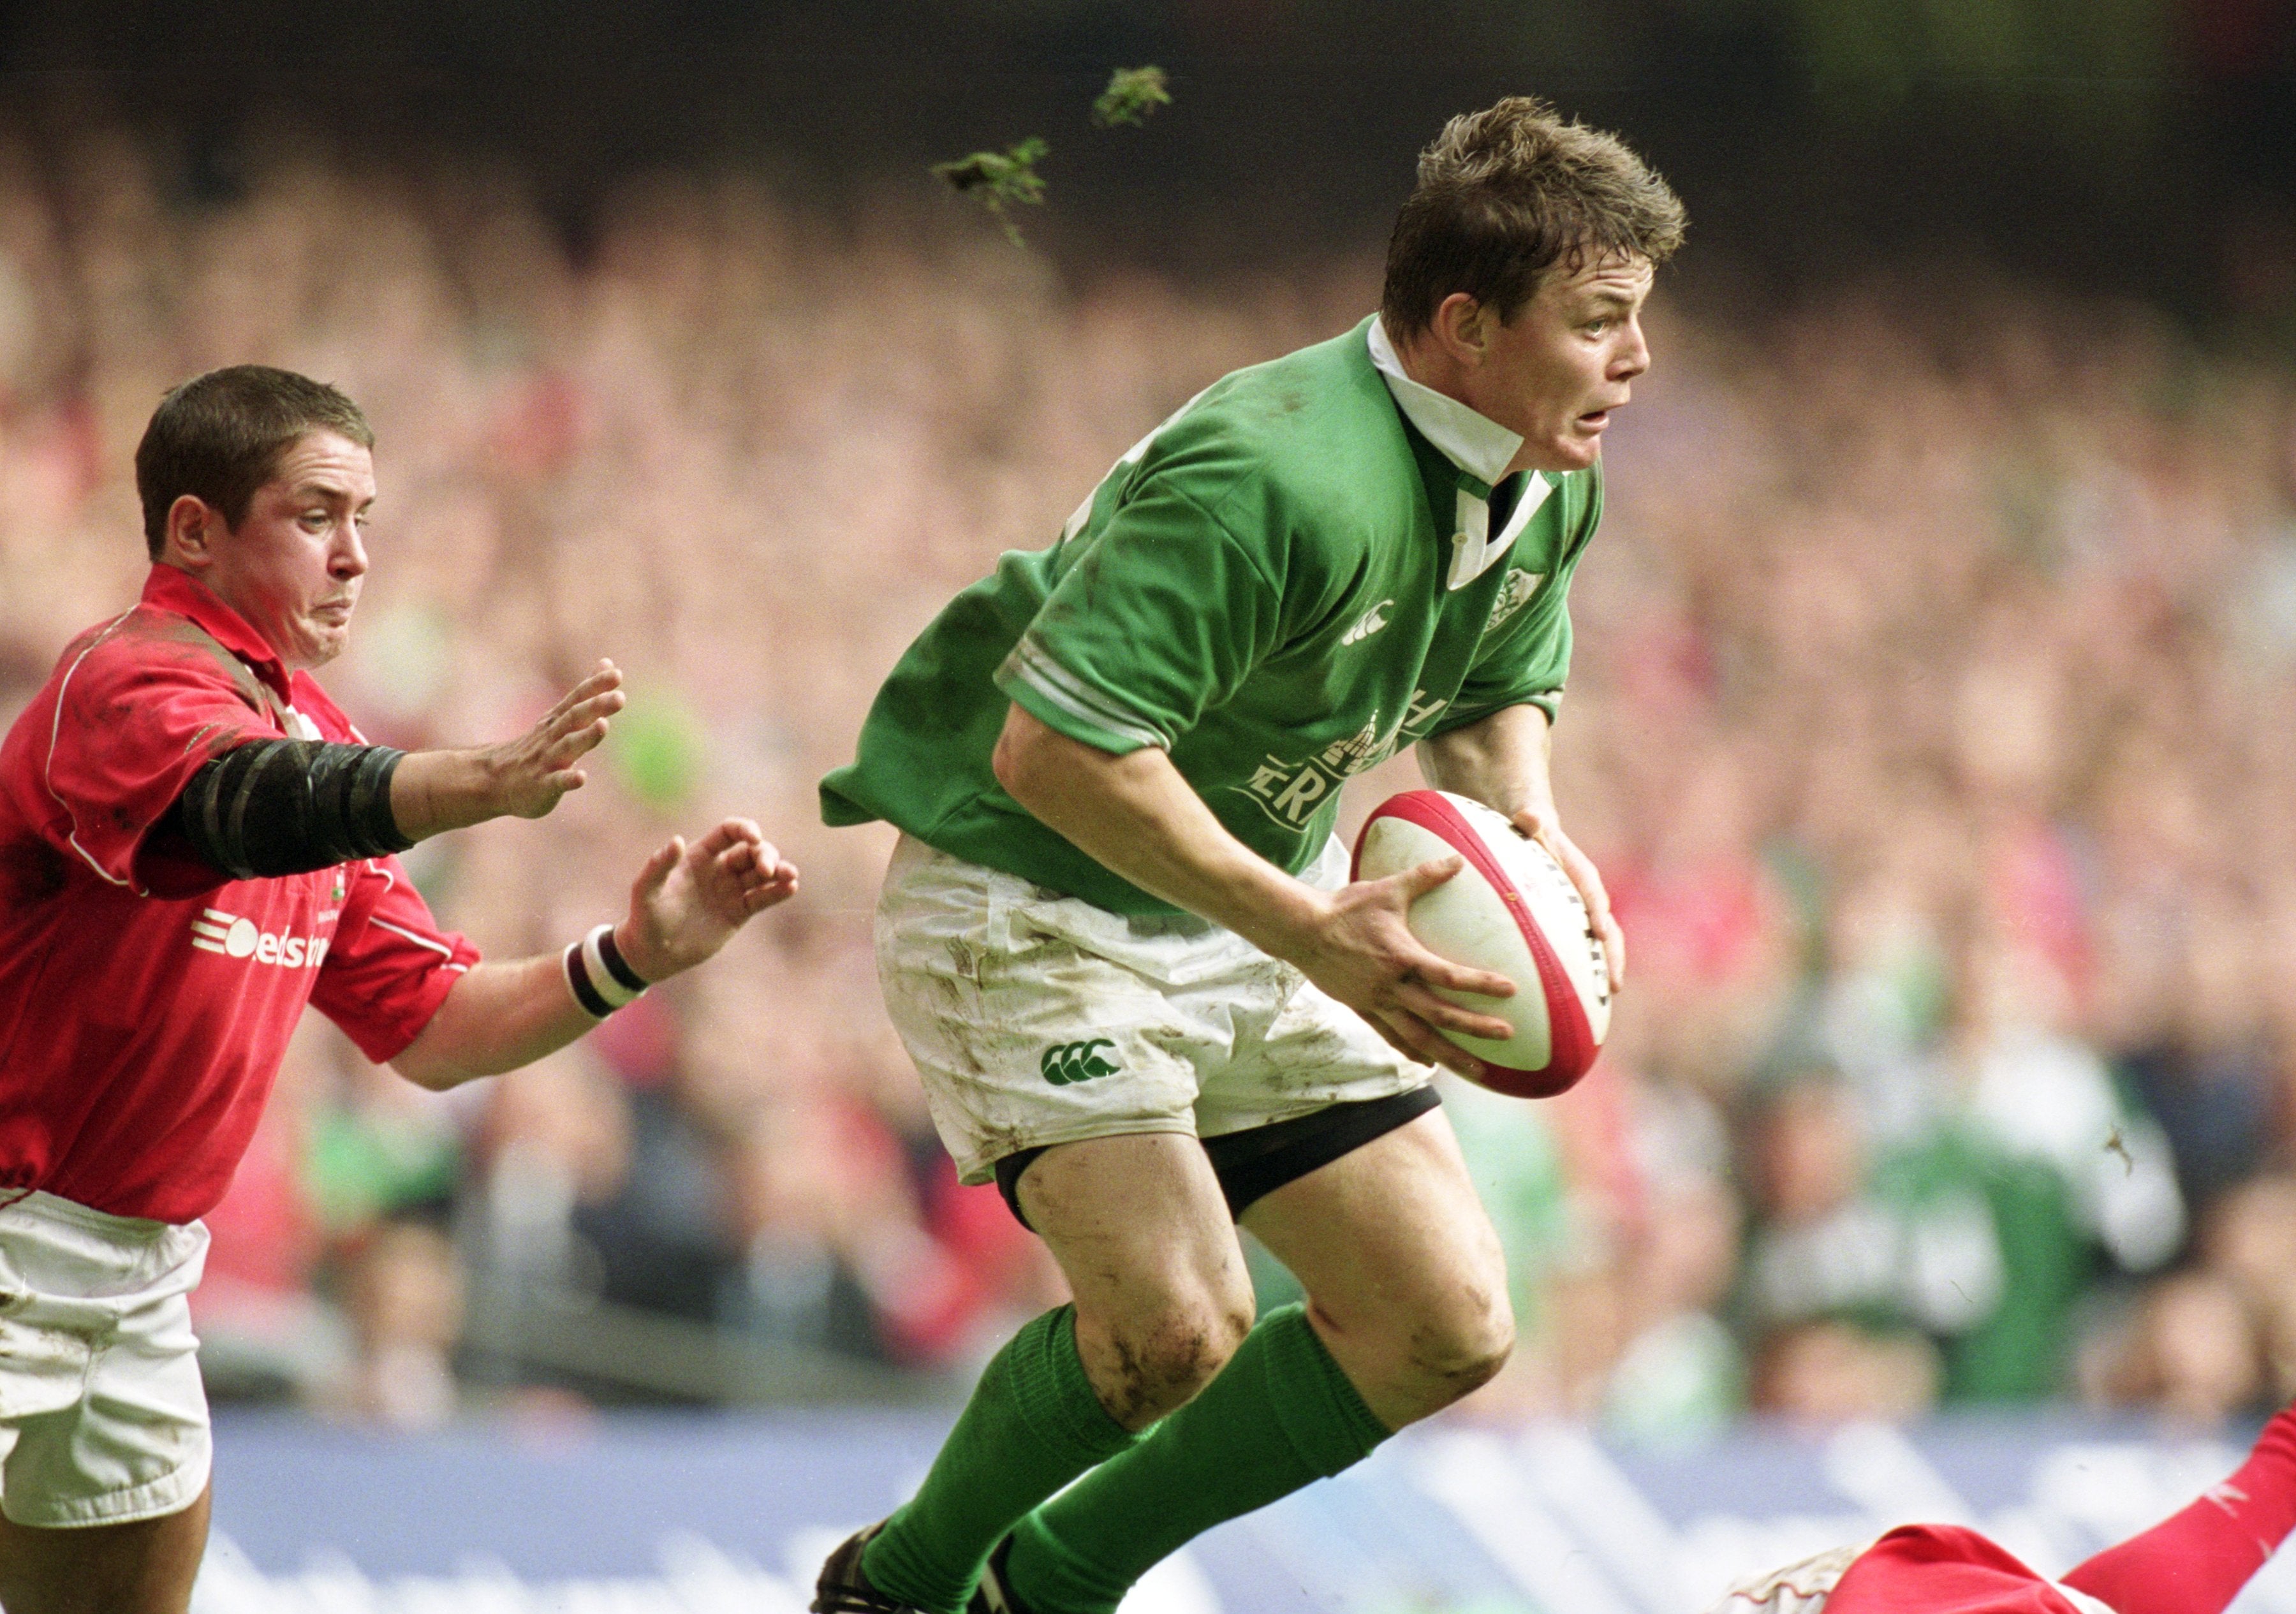 Warren Gatland coached Ireland when Brian O’Driscoll (pictured) inspired them to hammer Wales in the 2001 Six Nations